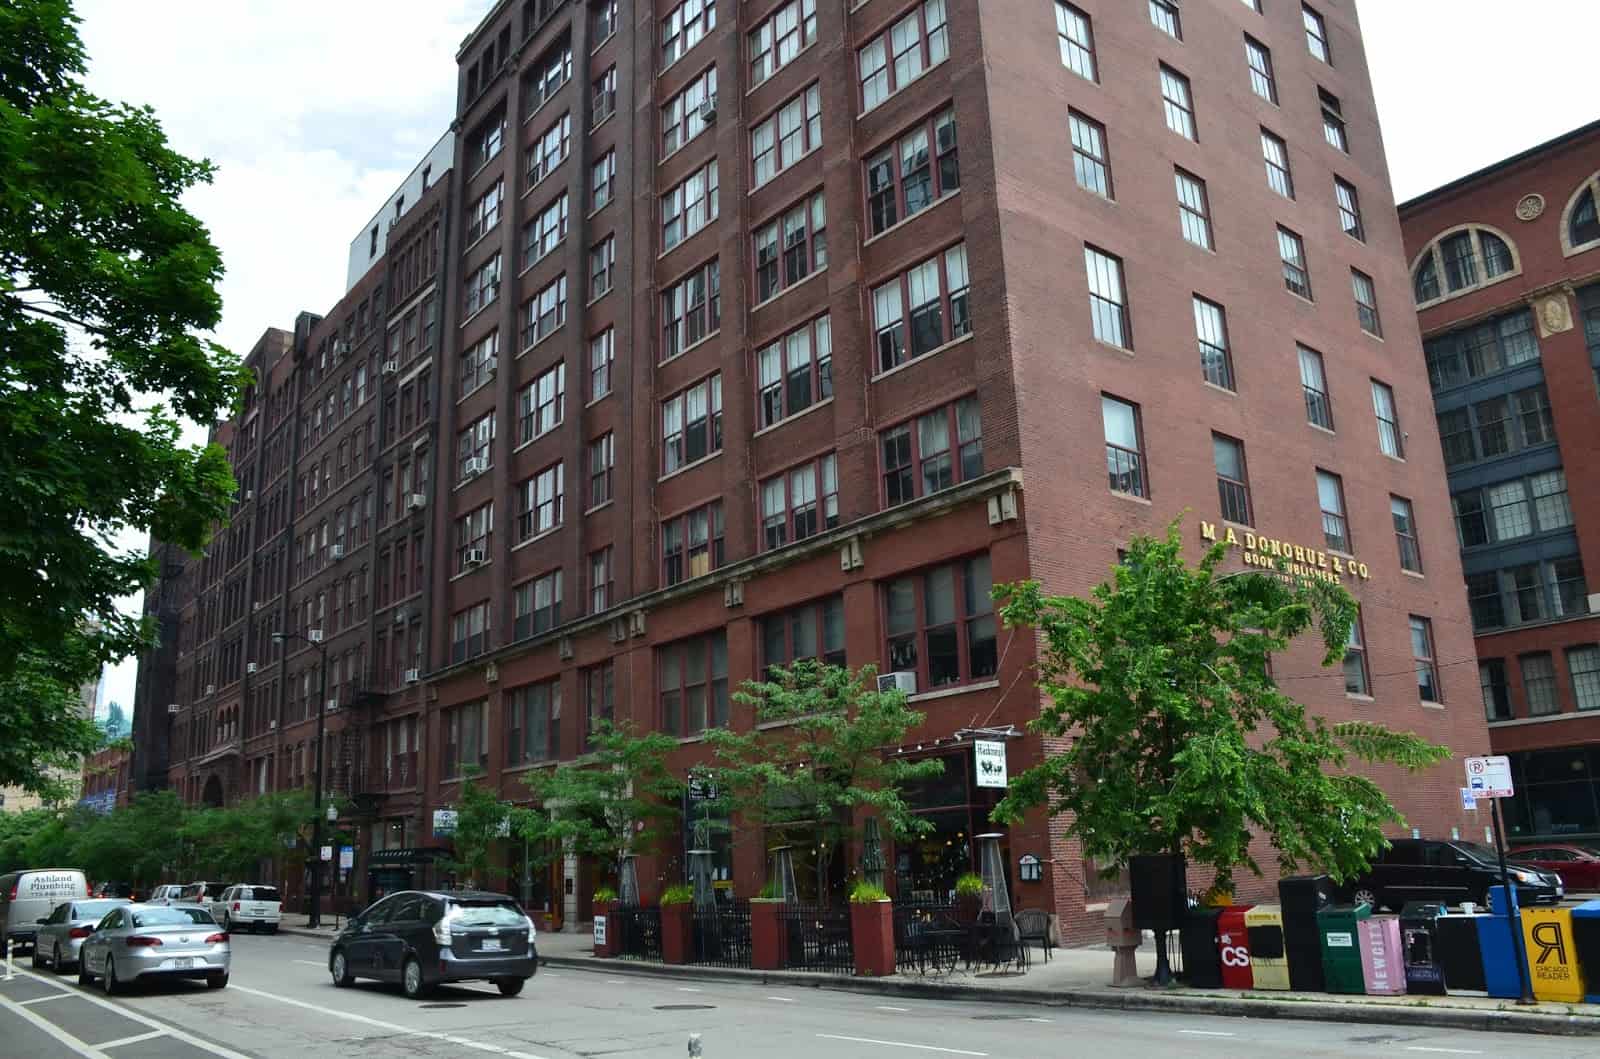 M. A. Donohue Building in Printer's Row Chicago